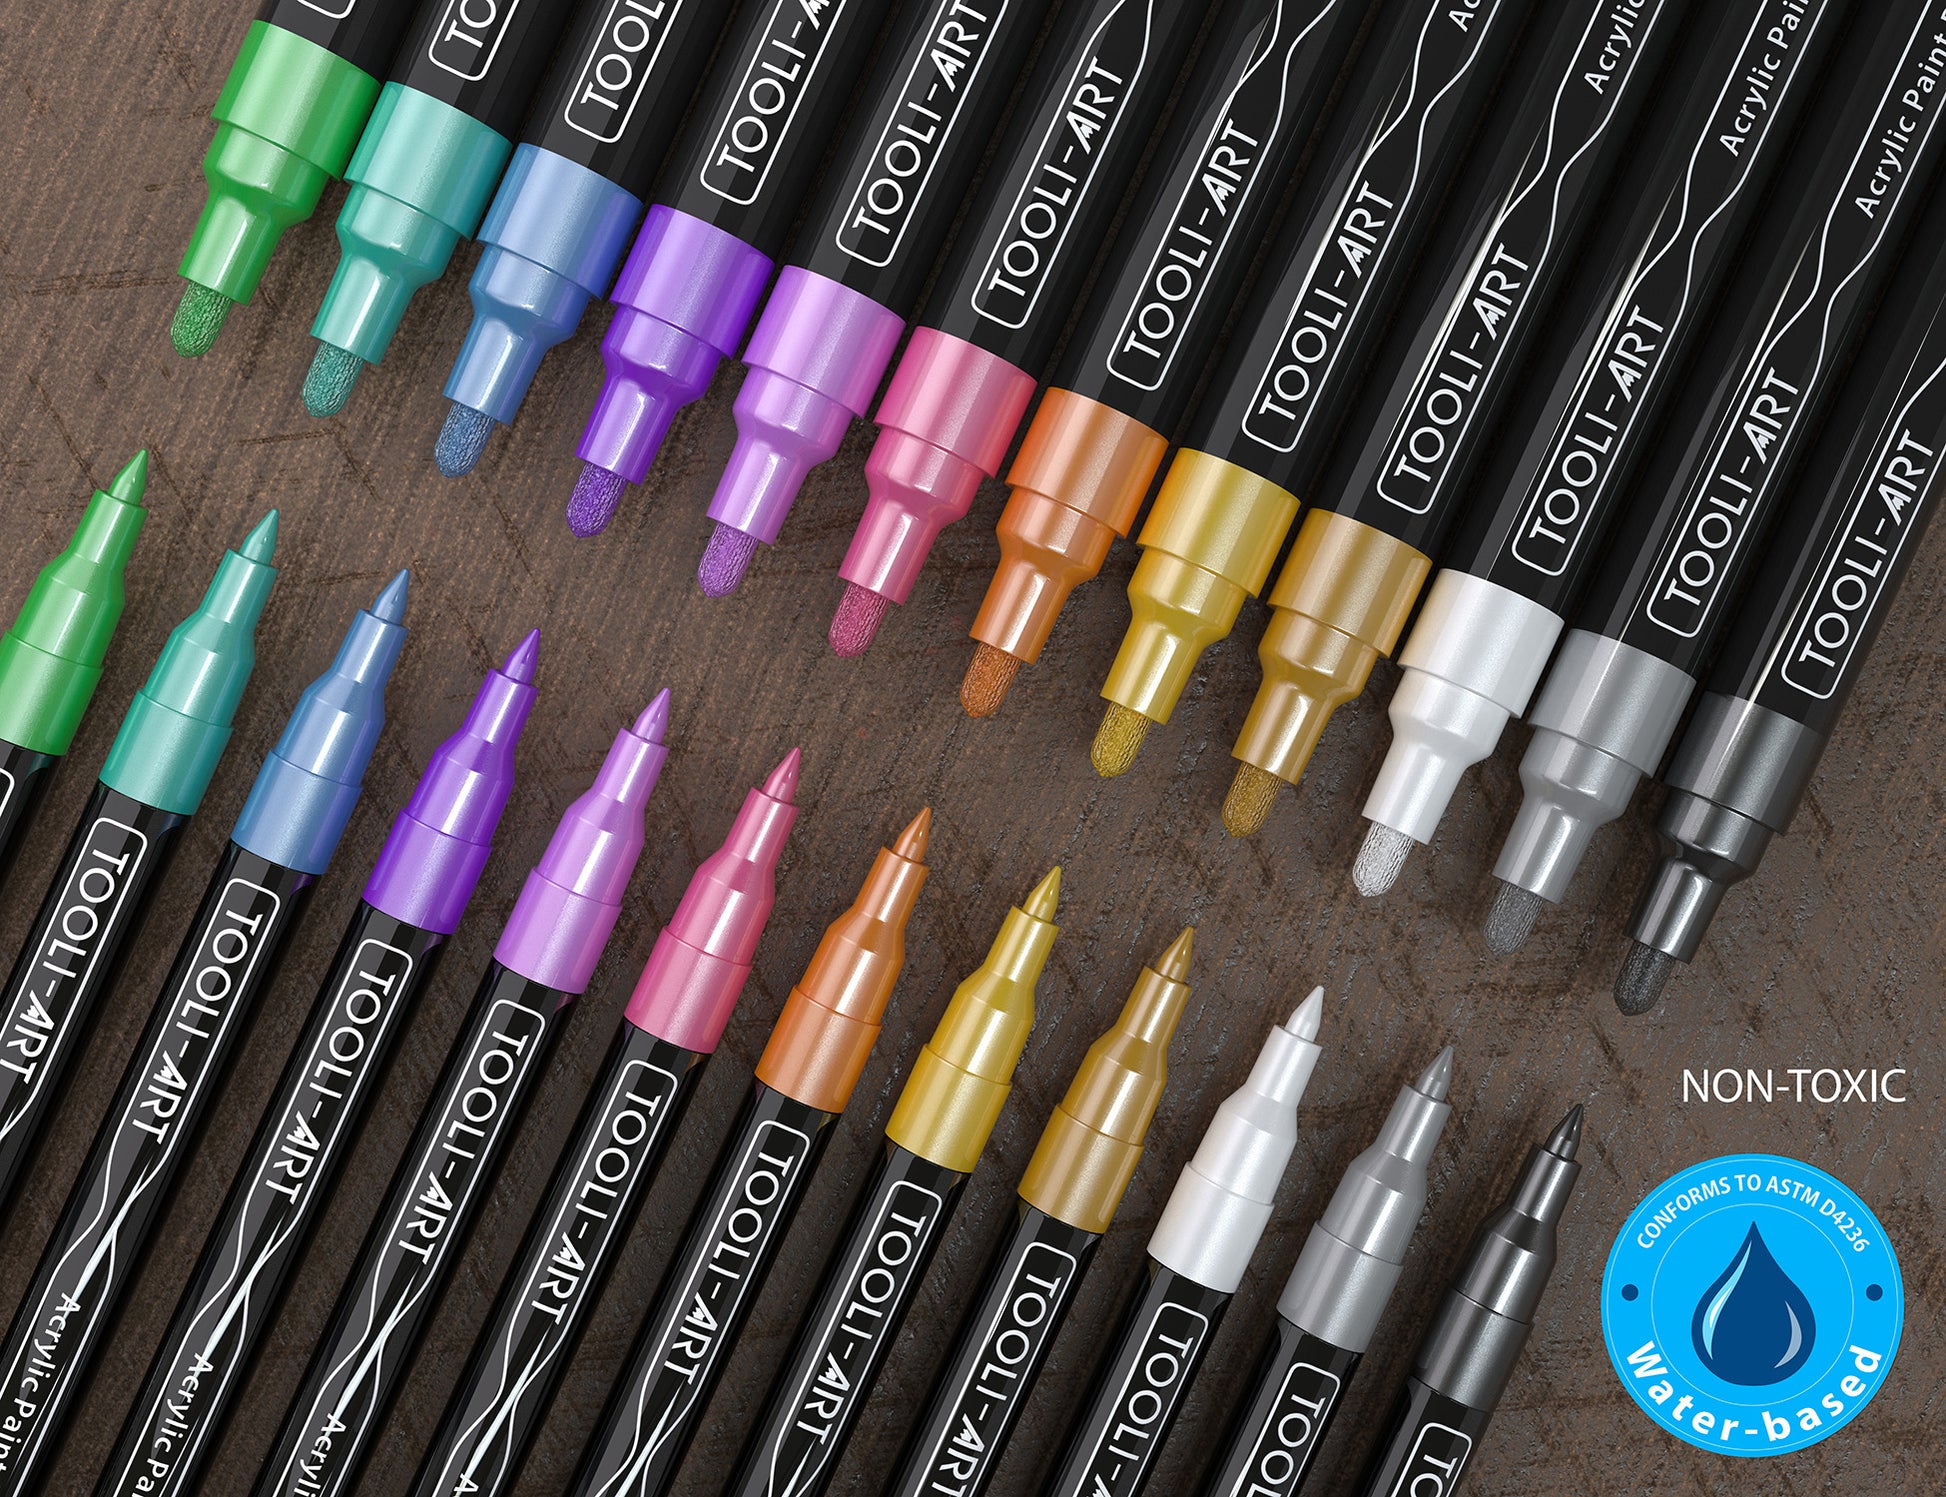 TOOLI-ART Acrylic Paint Pens Assorted Vibrant Markers for Rock Painting,  Canvas, Glass, Mugs, Wood, Fabric, Metal, Ceramics. Non Toxic, Quick Dry